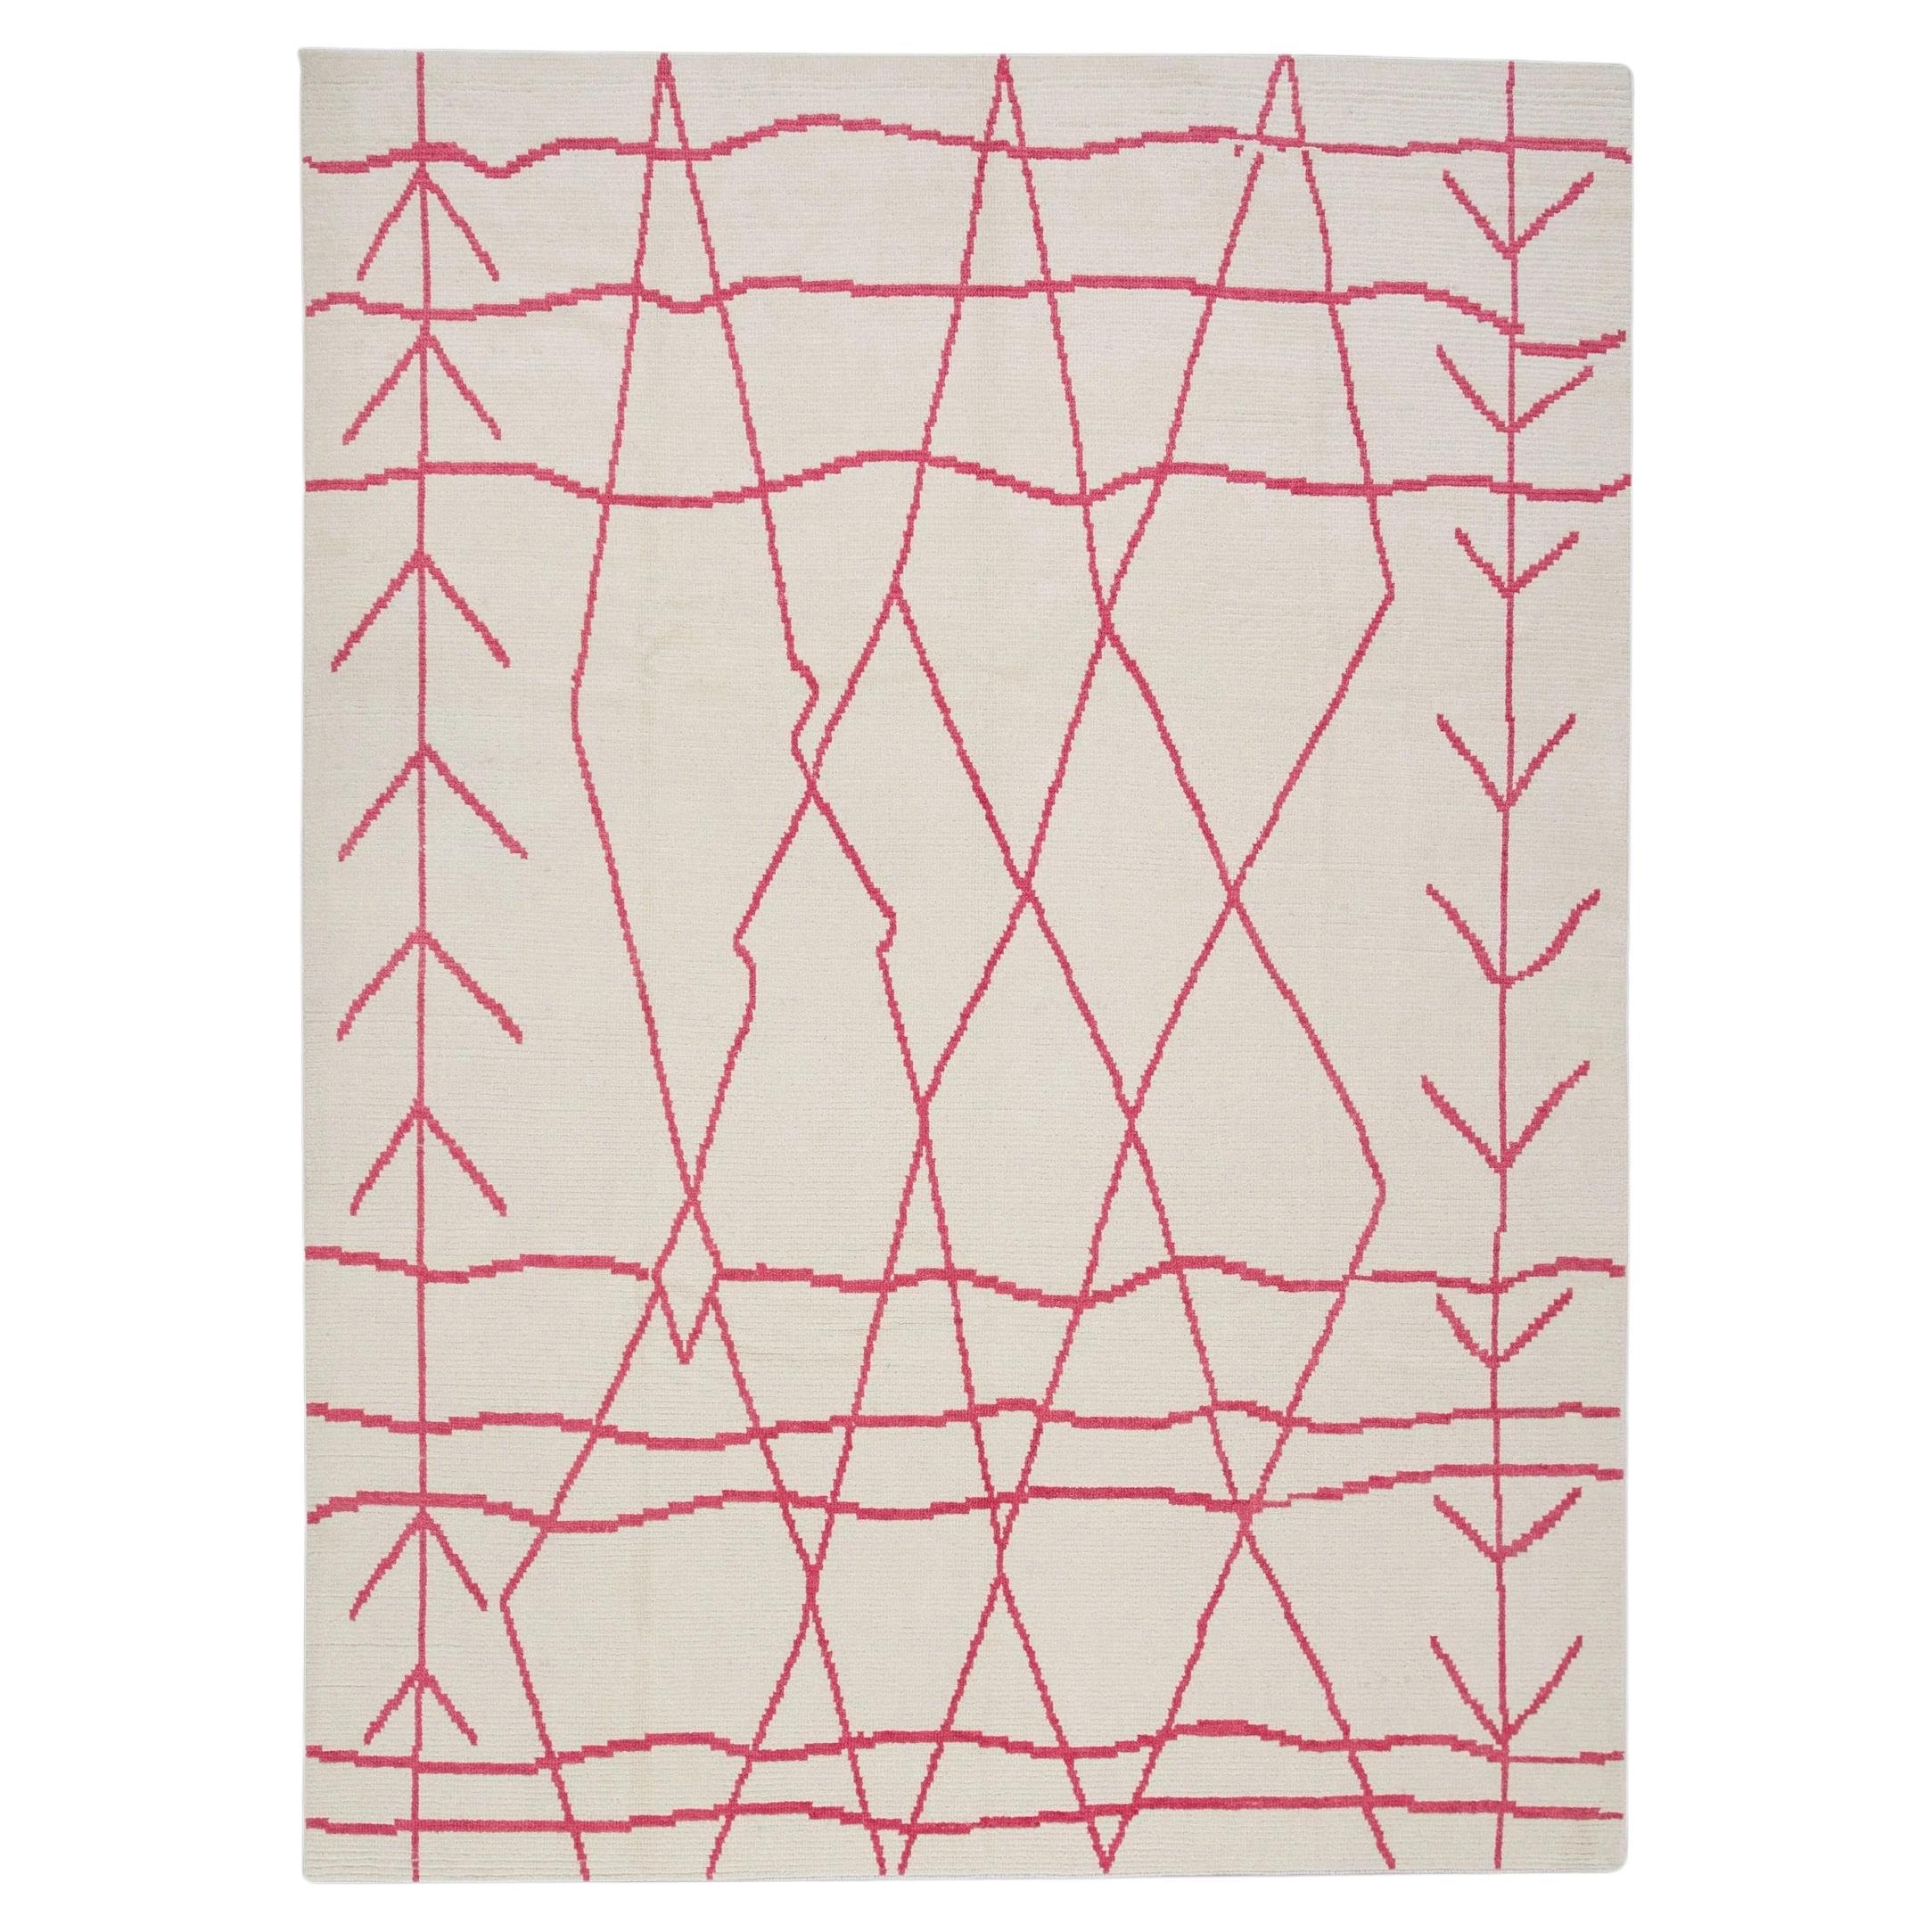 Pink & White 21st Century Modern Moroccan Style Wool Rug 9'3" x 12'5" For Sale